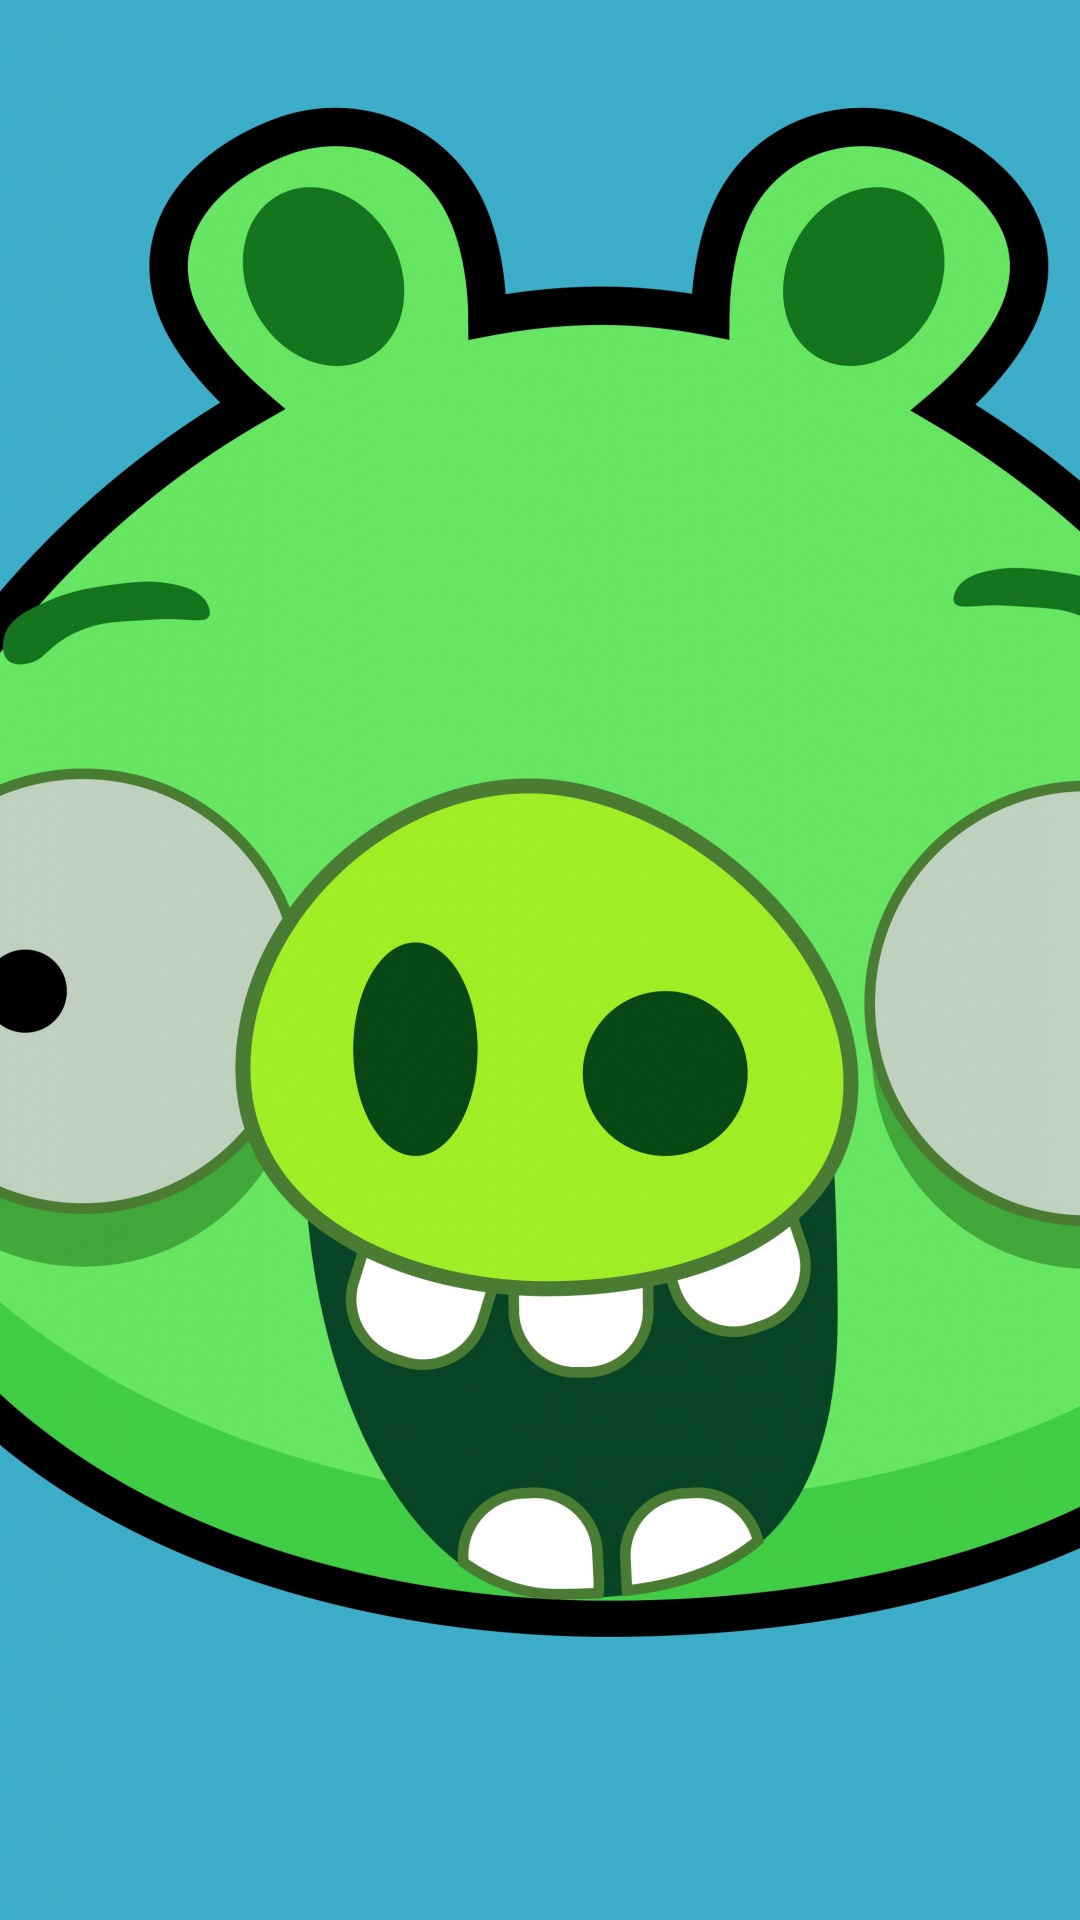 Angry Birds, Green, Cartoon, Smile, Illustration. Wallpaper in 1080x1920 Resolution